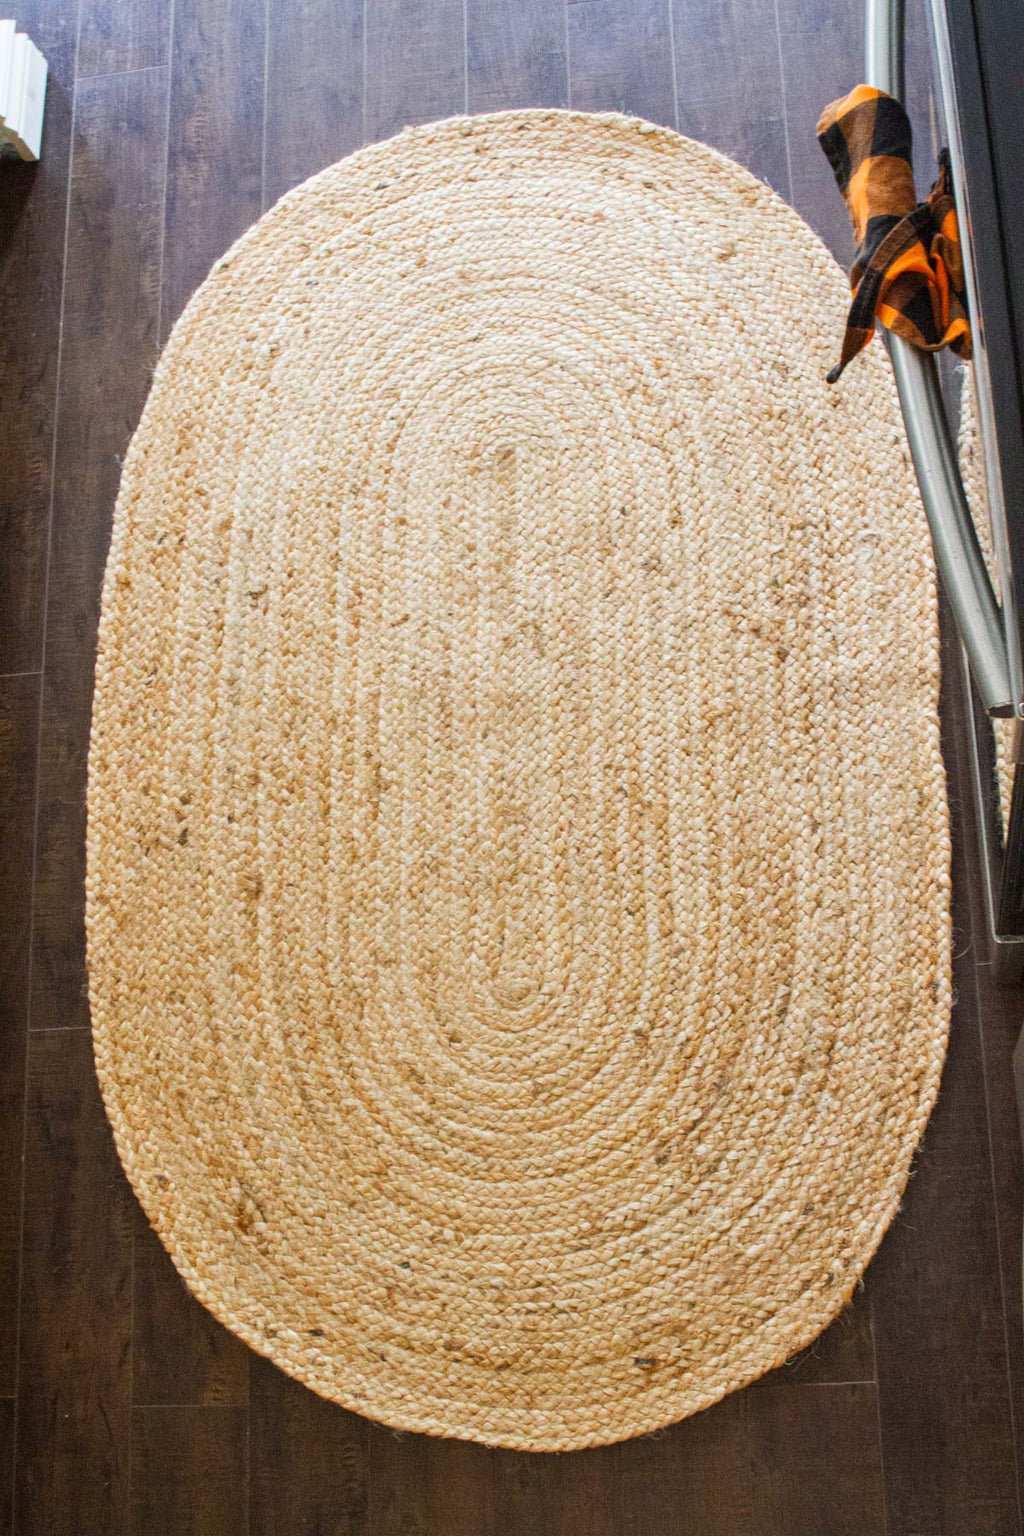 Network Rugs Natural Hand-Braided Jute Oval Rug